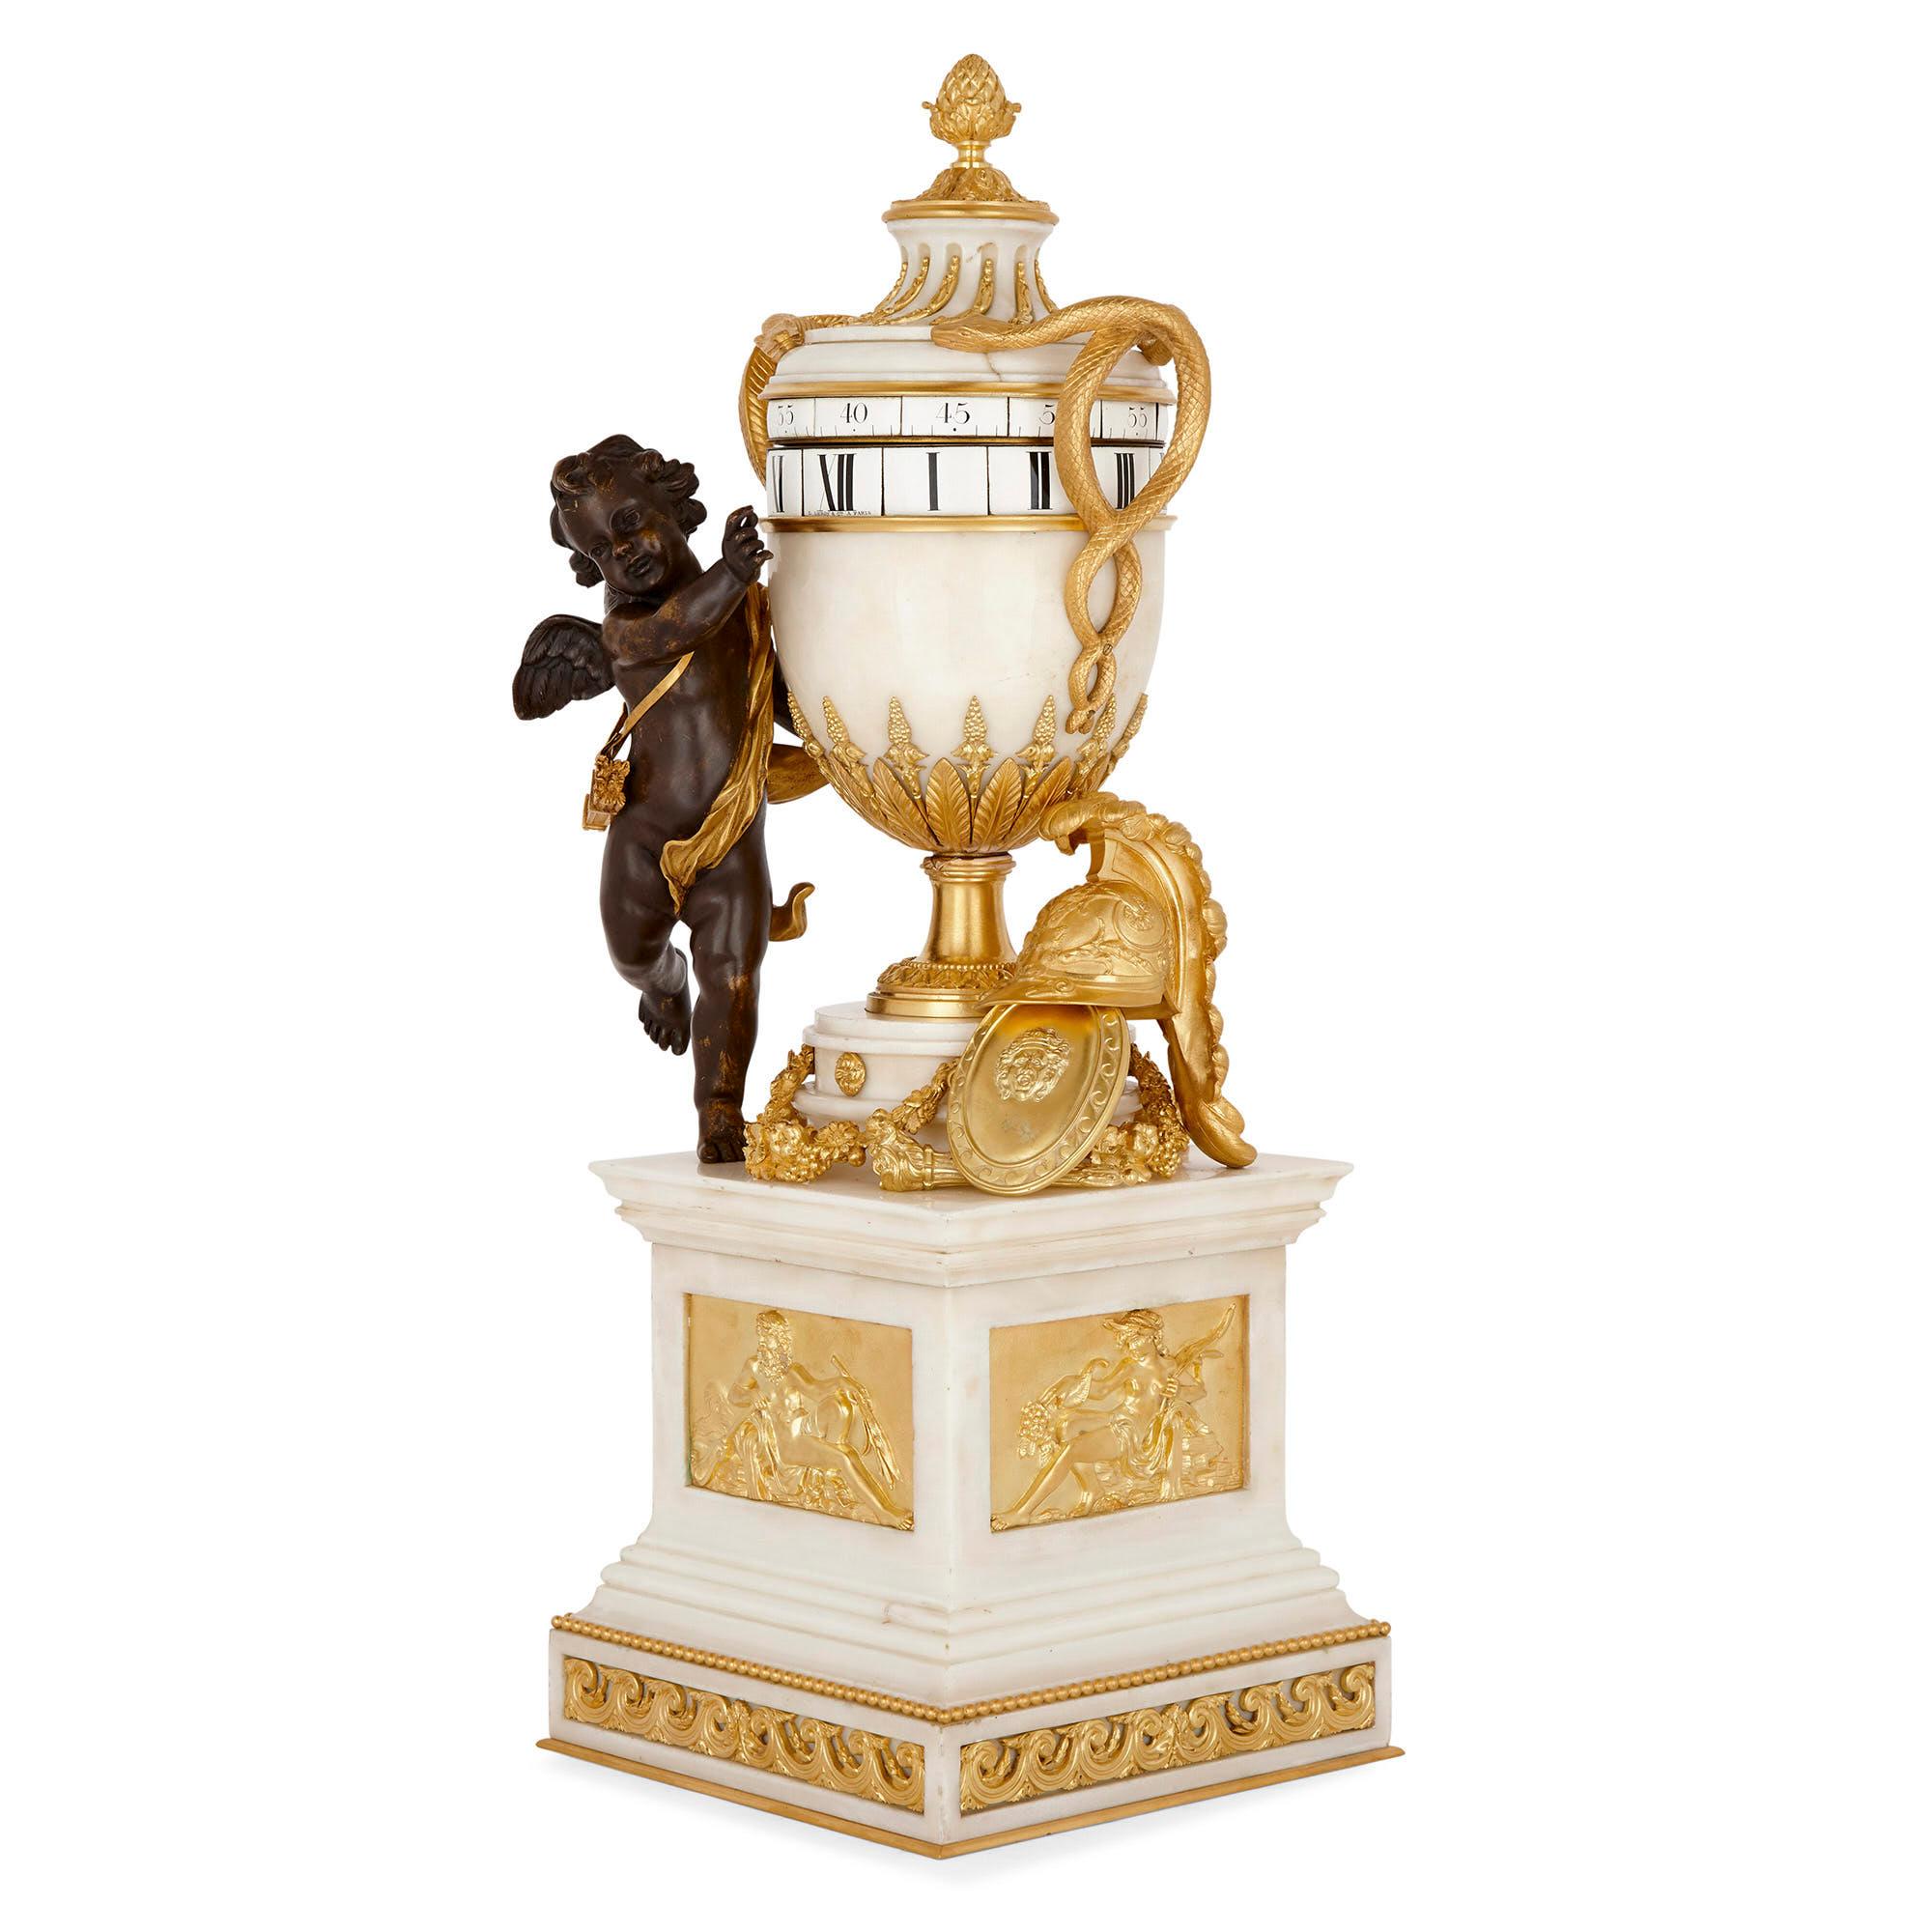 Neoclassical style circular movement mantel clock by Leroy & Cie
French, circa 1880
Measures: Height 72cm, width 25cm, depth 25cm

This superb mantel clock, crafted from white marble, gilt bronze, and patinated bronze—takes the shape of an